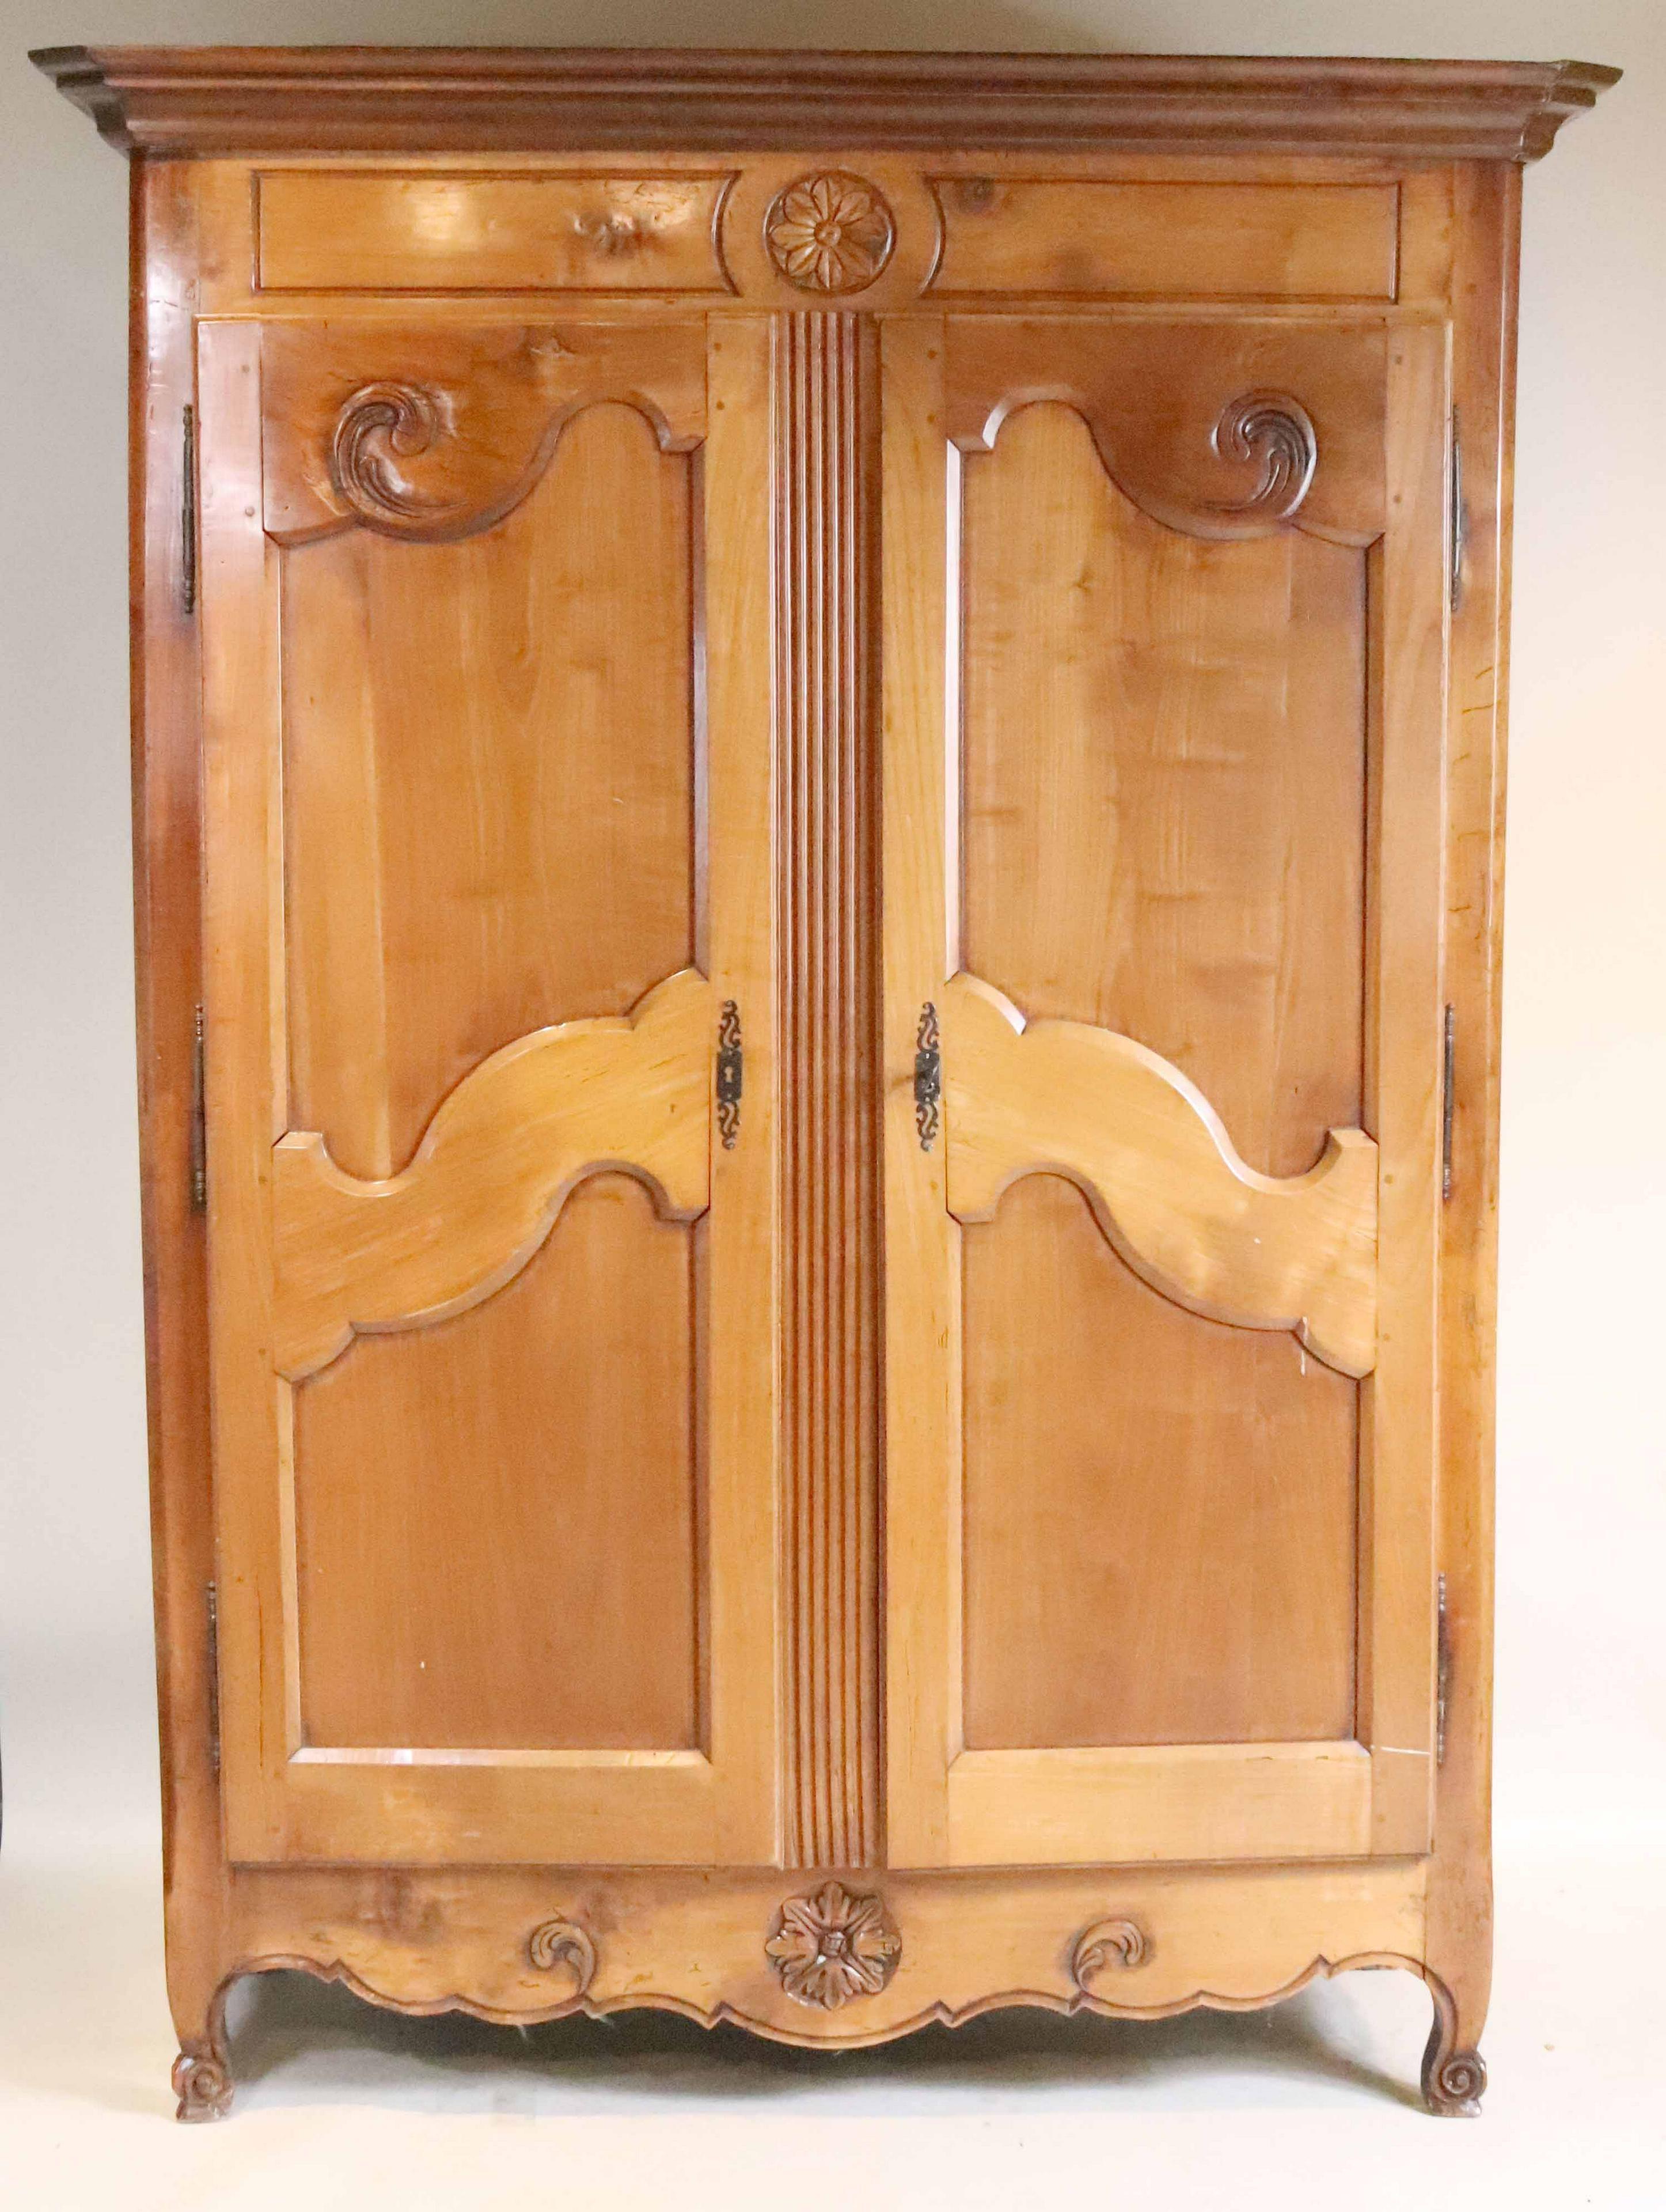 A classic French provincial Louis XV period armoire in fruitwood, circa 1780, with interior removable shelves, beautifully carved and paneled doors with carved flowers above and below on the crest and apron. The feet are carved 